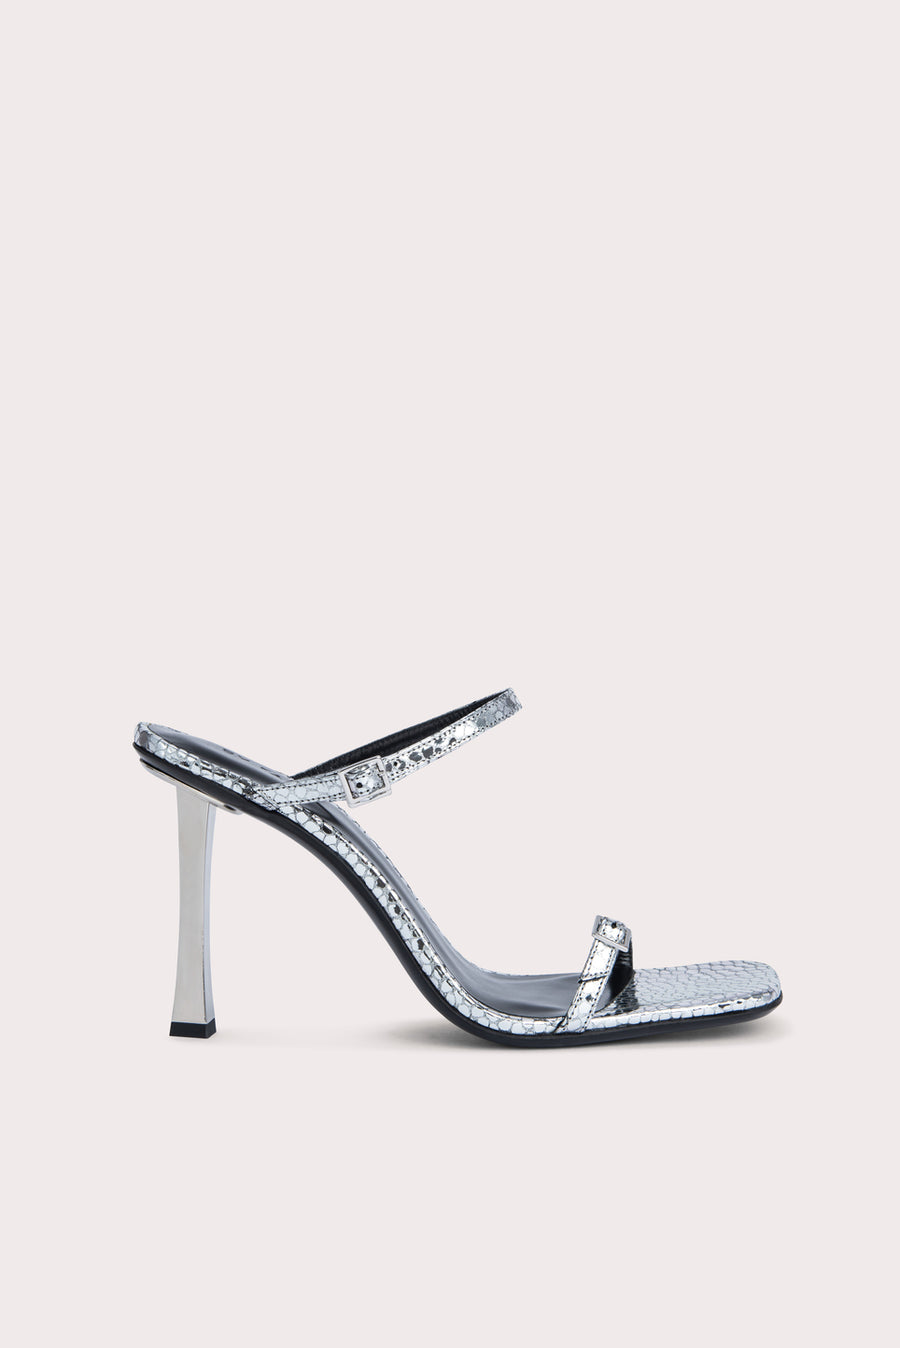 Slip these on and your outfit is instantly elevated. The 'Flick' heel is crafted from a silver flagstone leather and has mini buckles that can be adjusted. Pair with a frayed straight leg denim and a bustier to complete the look.